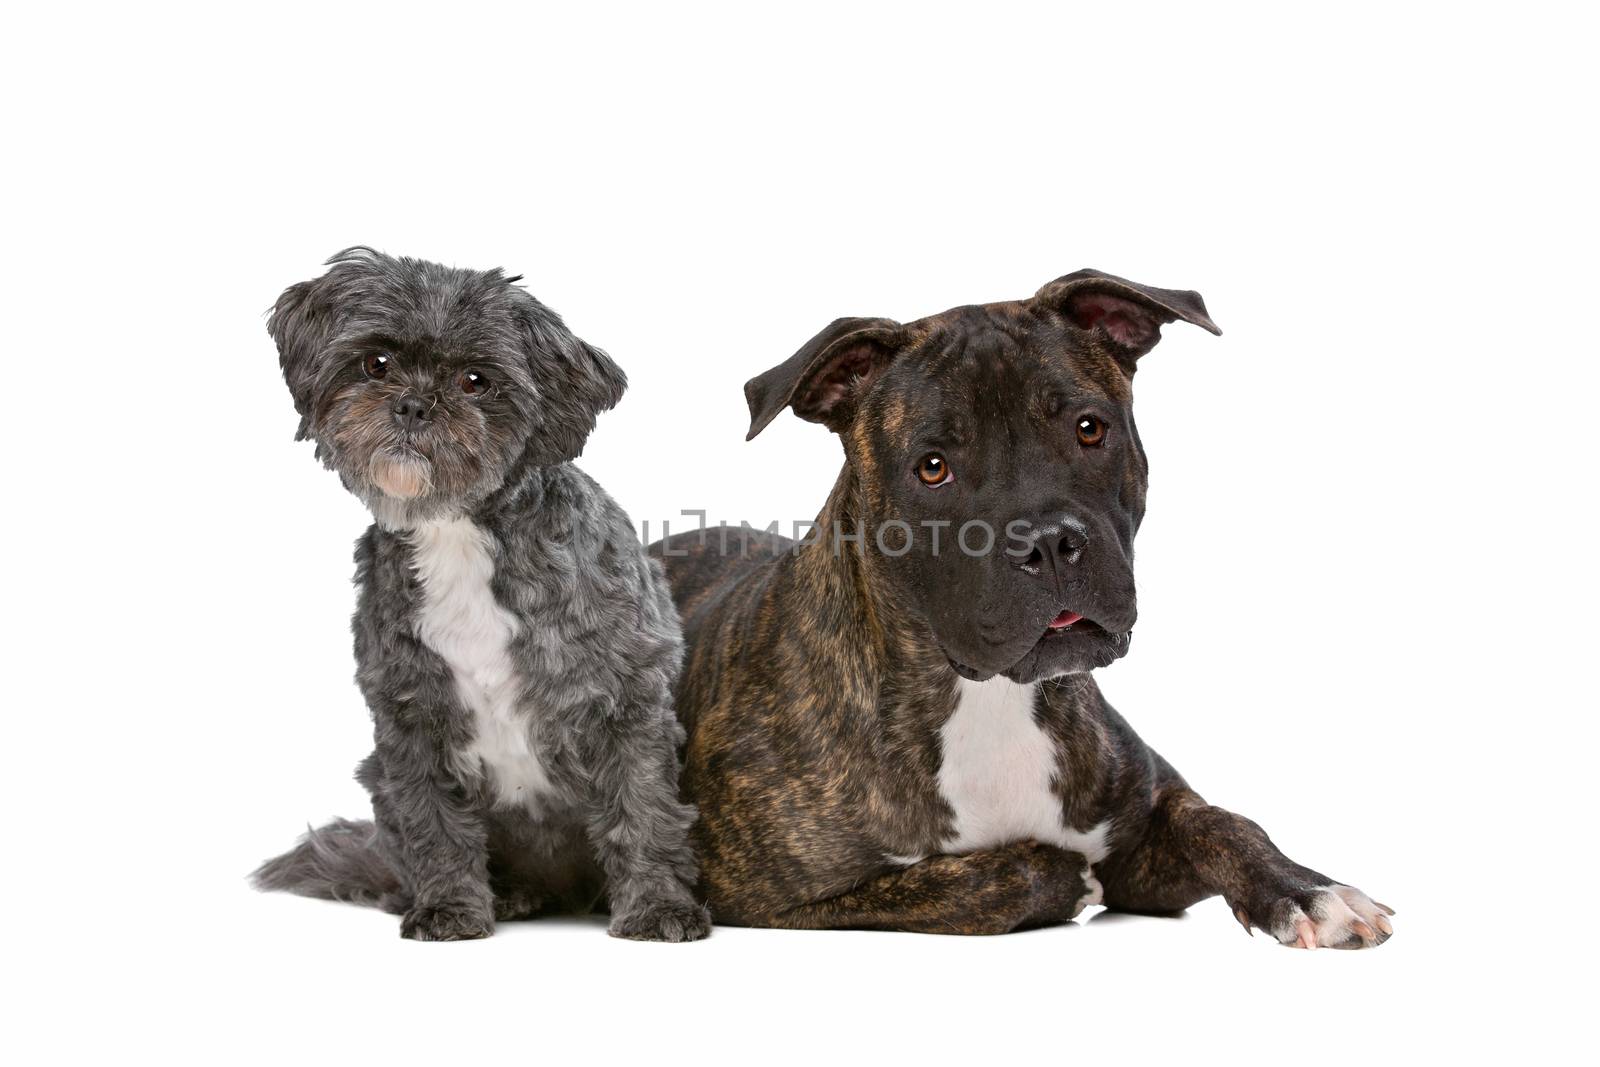 A stafford  and a Lhasa apso dog in front of a white background